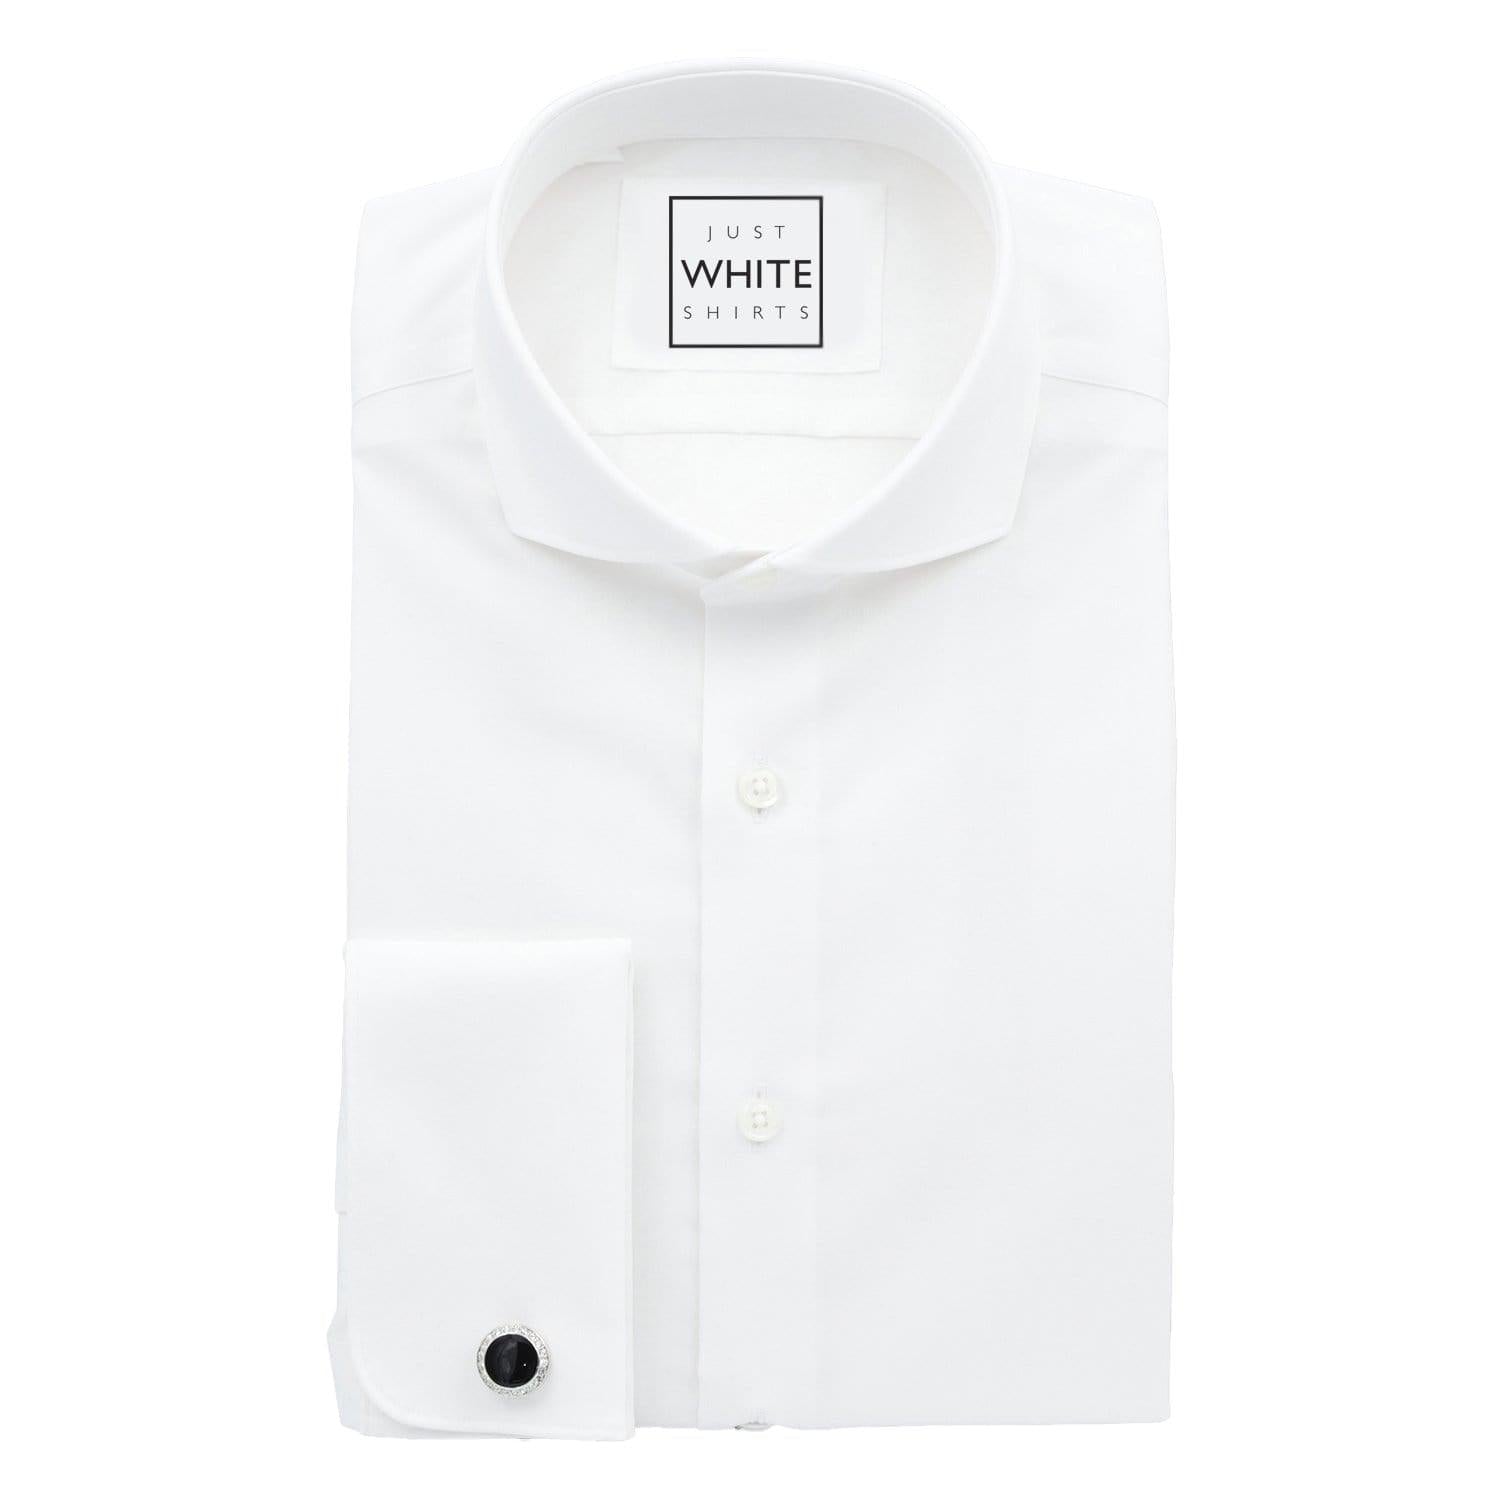 White Egyptian Cotton Non Iron Dress Shirt, Spread Collar and French Cuffs - Just White Shirts